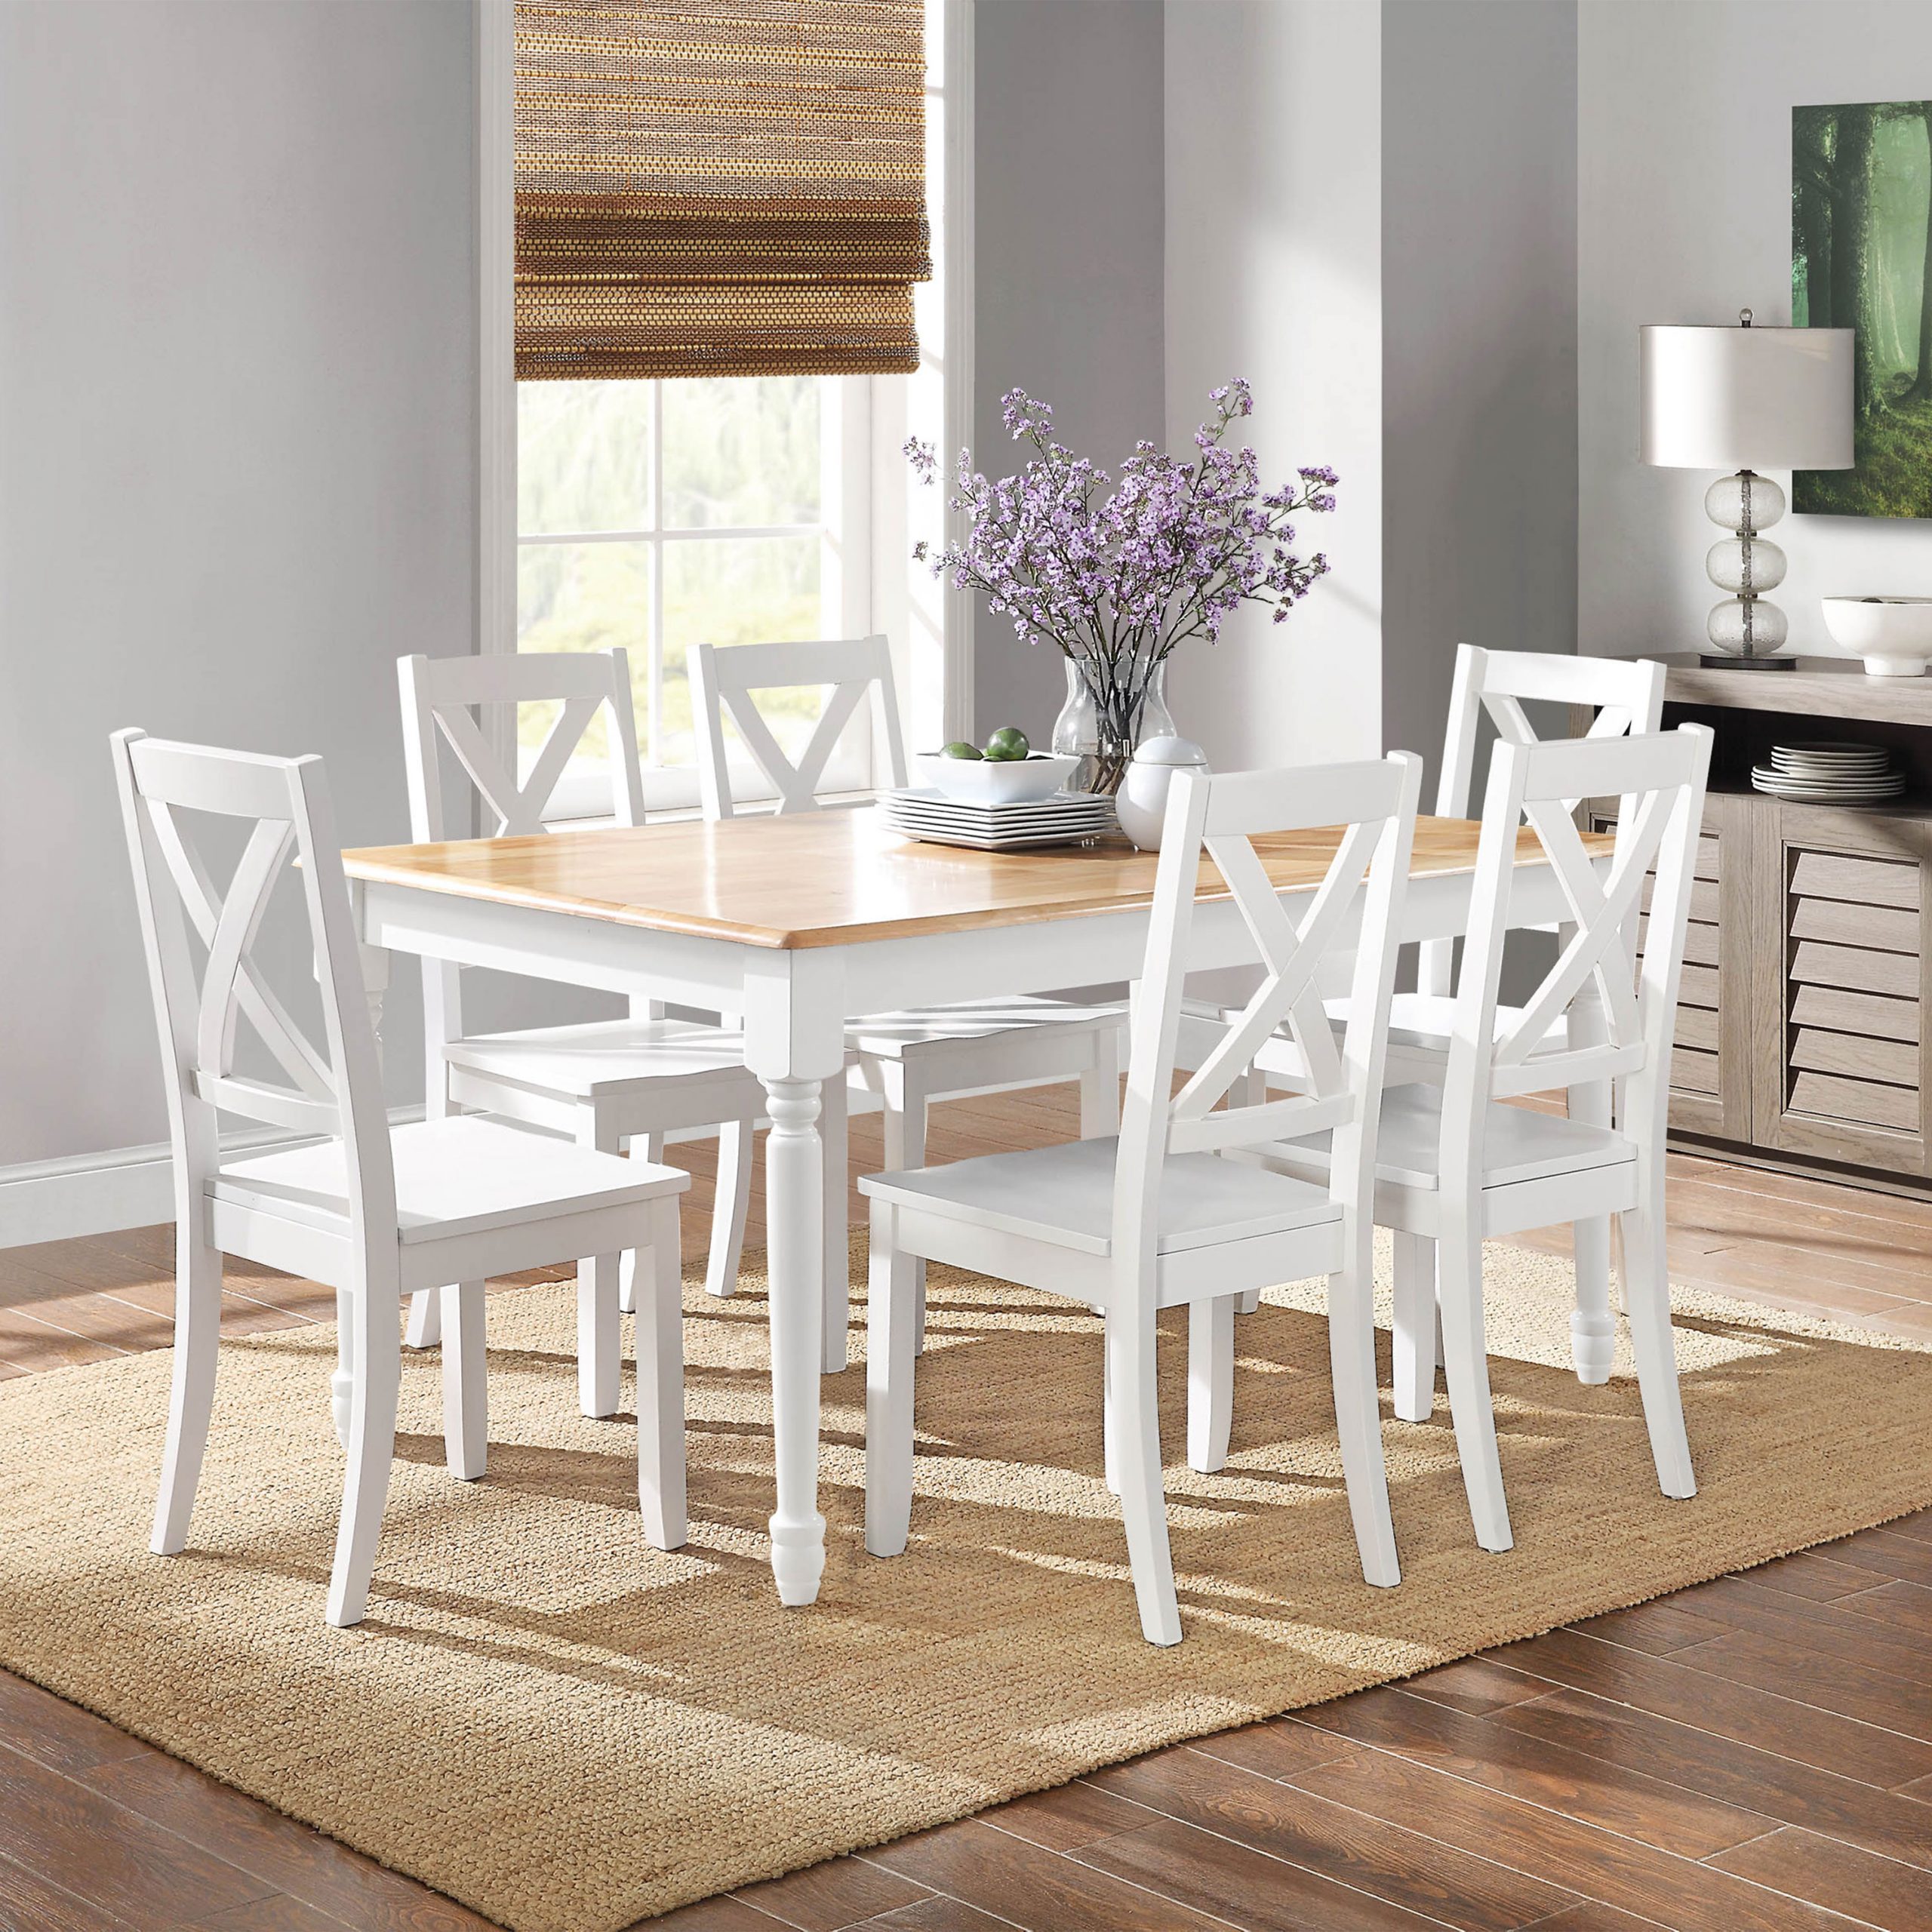 Wooden Farmhouse Dining Chairs Country Cottage Office Room pour Countrycottage Dining Room Furniture Reviews 